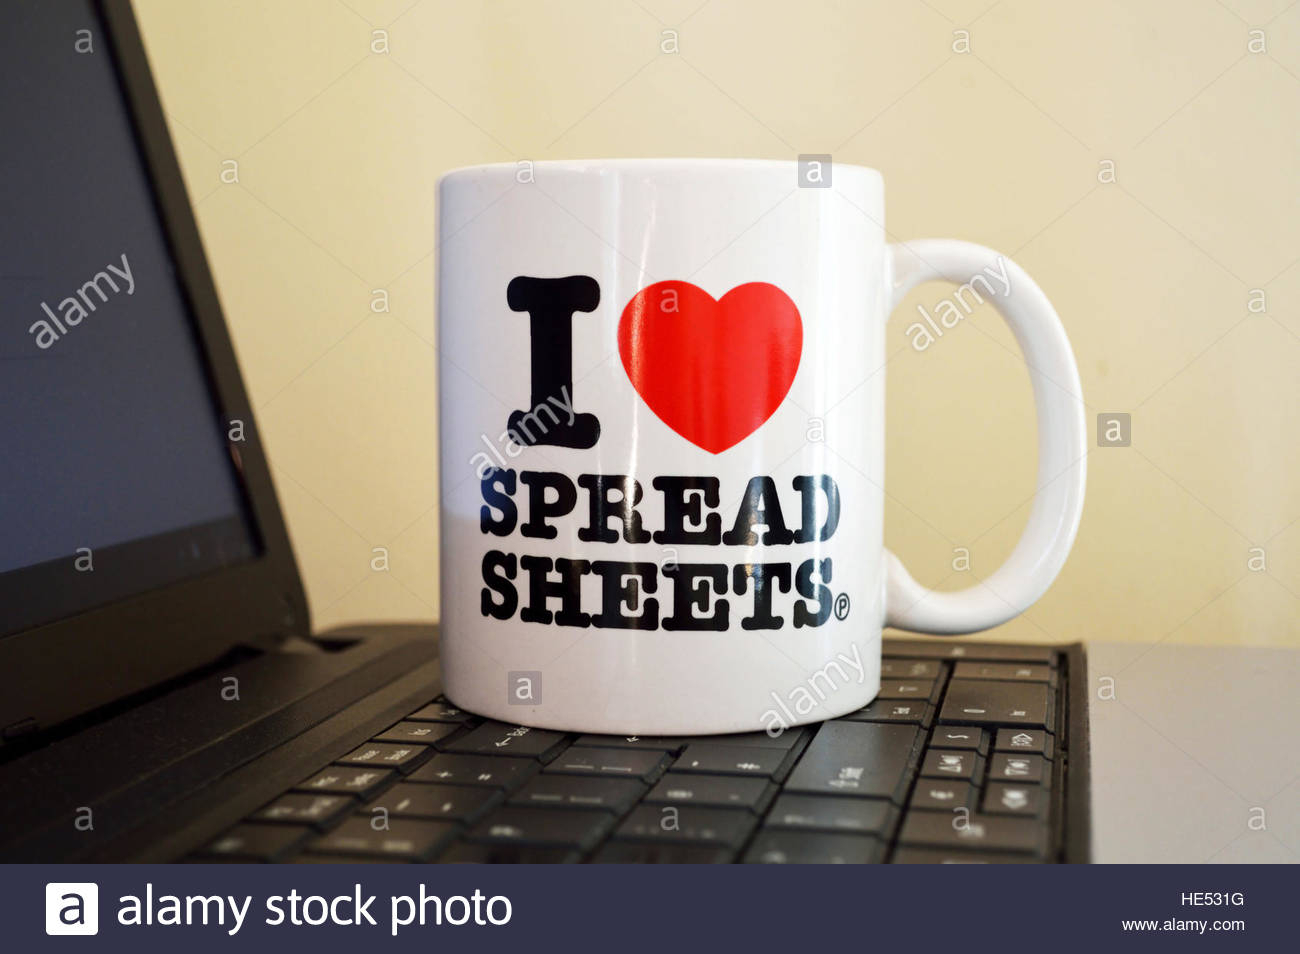 I Love Spreadsheets regarding An &quot;i Love Spreadsheets&quot; Mug On A Laptop Keyboard Stock Photo